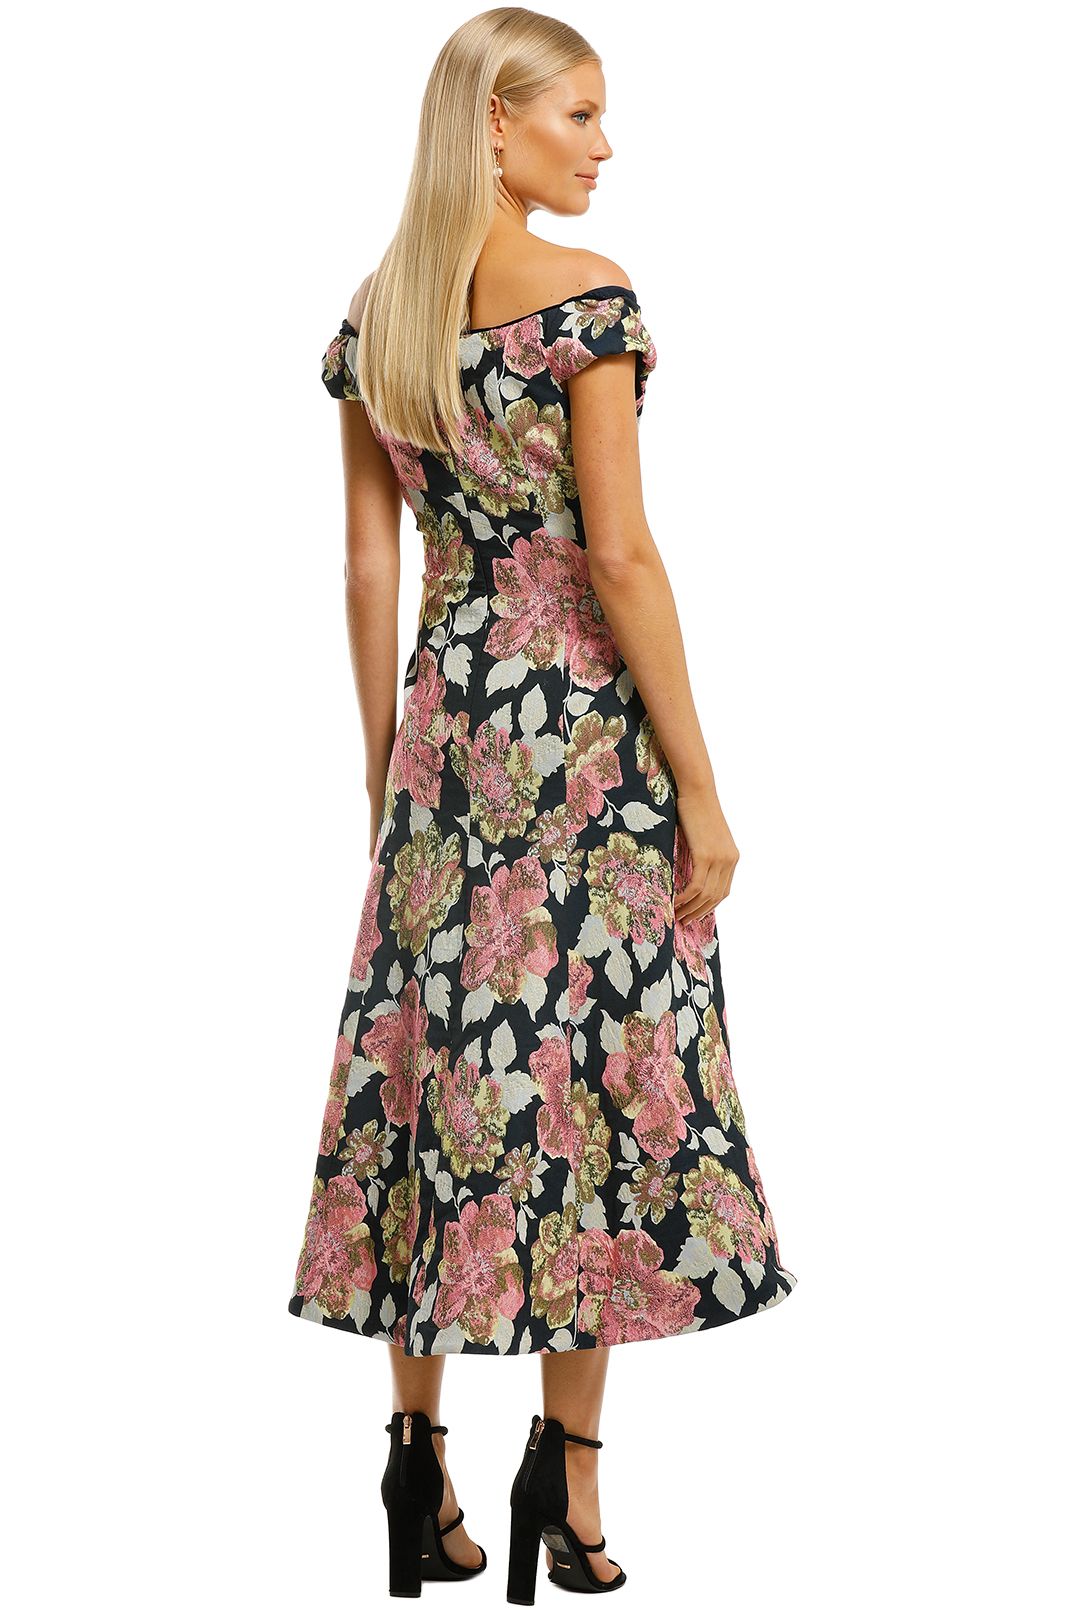 Moss-and-Spy-Beatrice-Midi-A-Line-Dress-Floral-Back